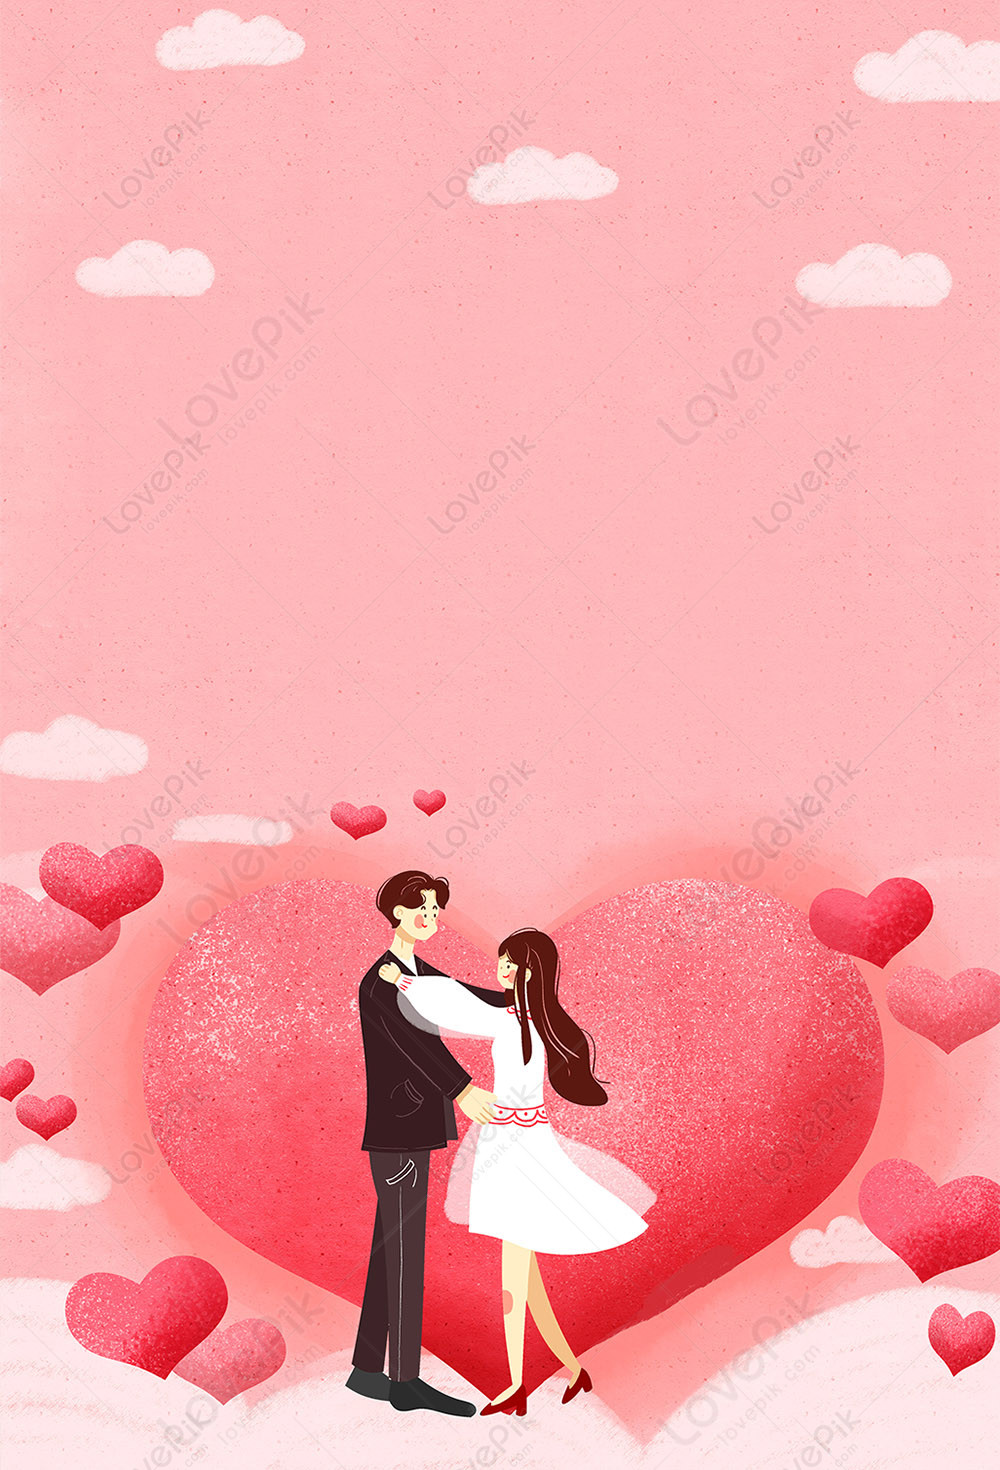 Valentines Day Poster Background Download Free | Poster Background Image on  Lovepik | 401670661